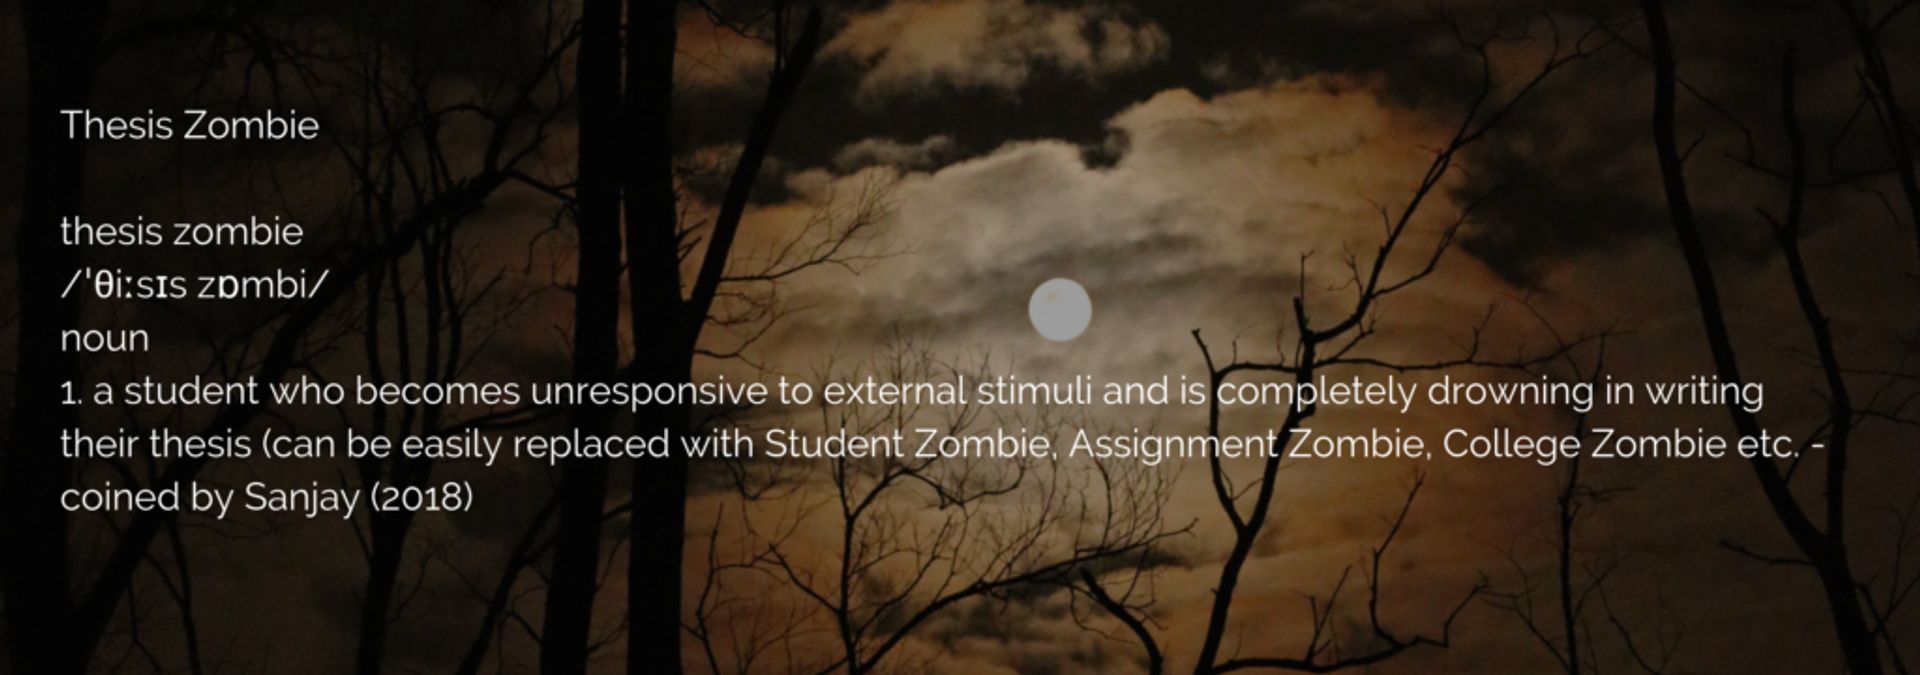 thesis zombie defined